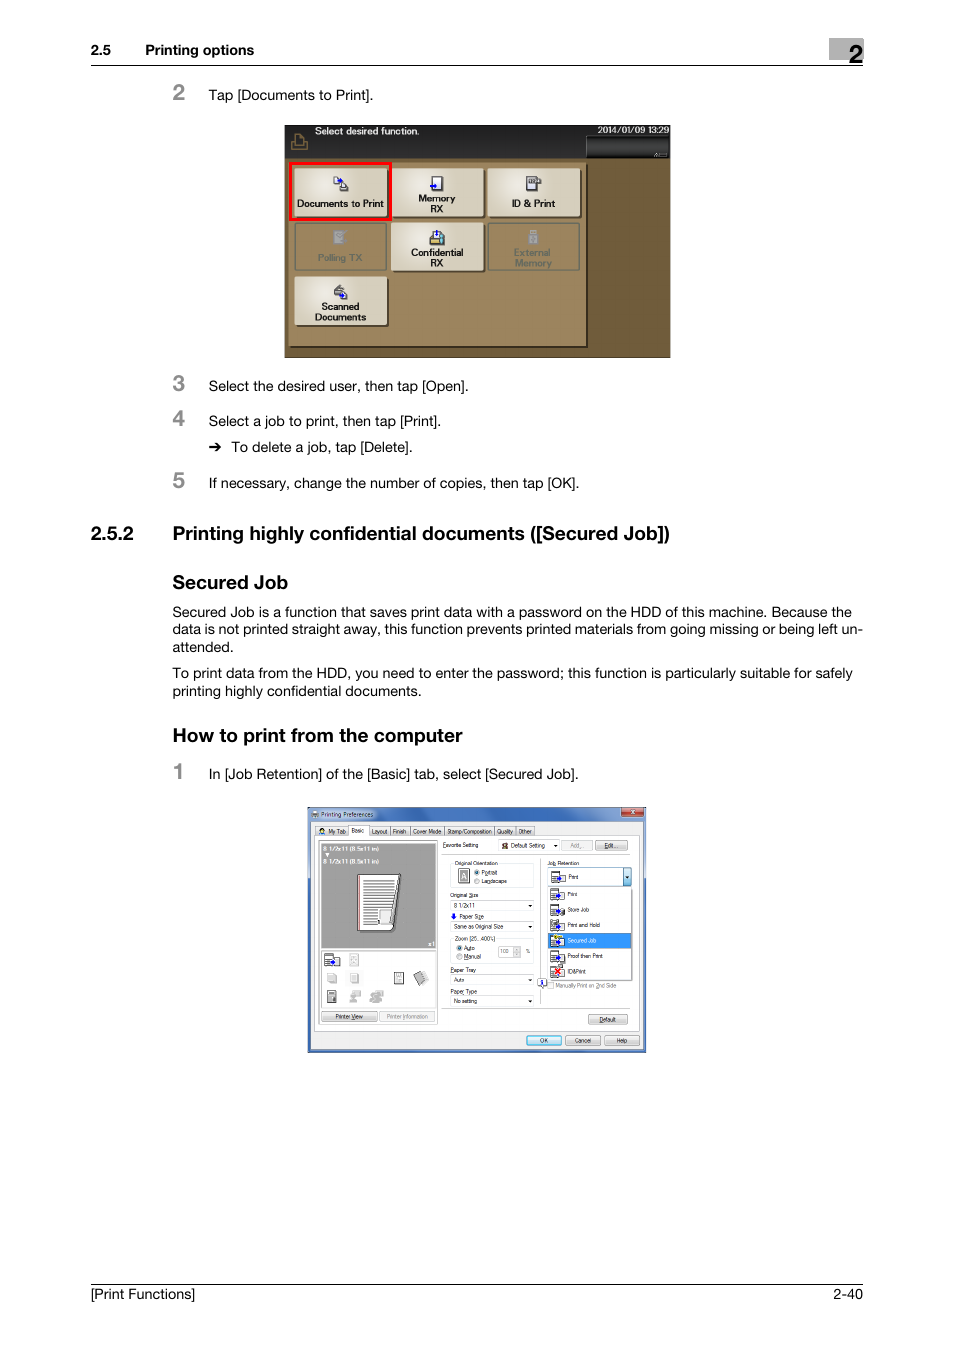 Secured job, How to print from the computer | Konica Minolta bizhub 4050 User Manual | Page 50 / 115